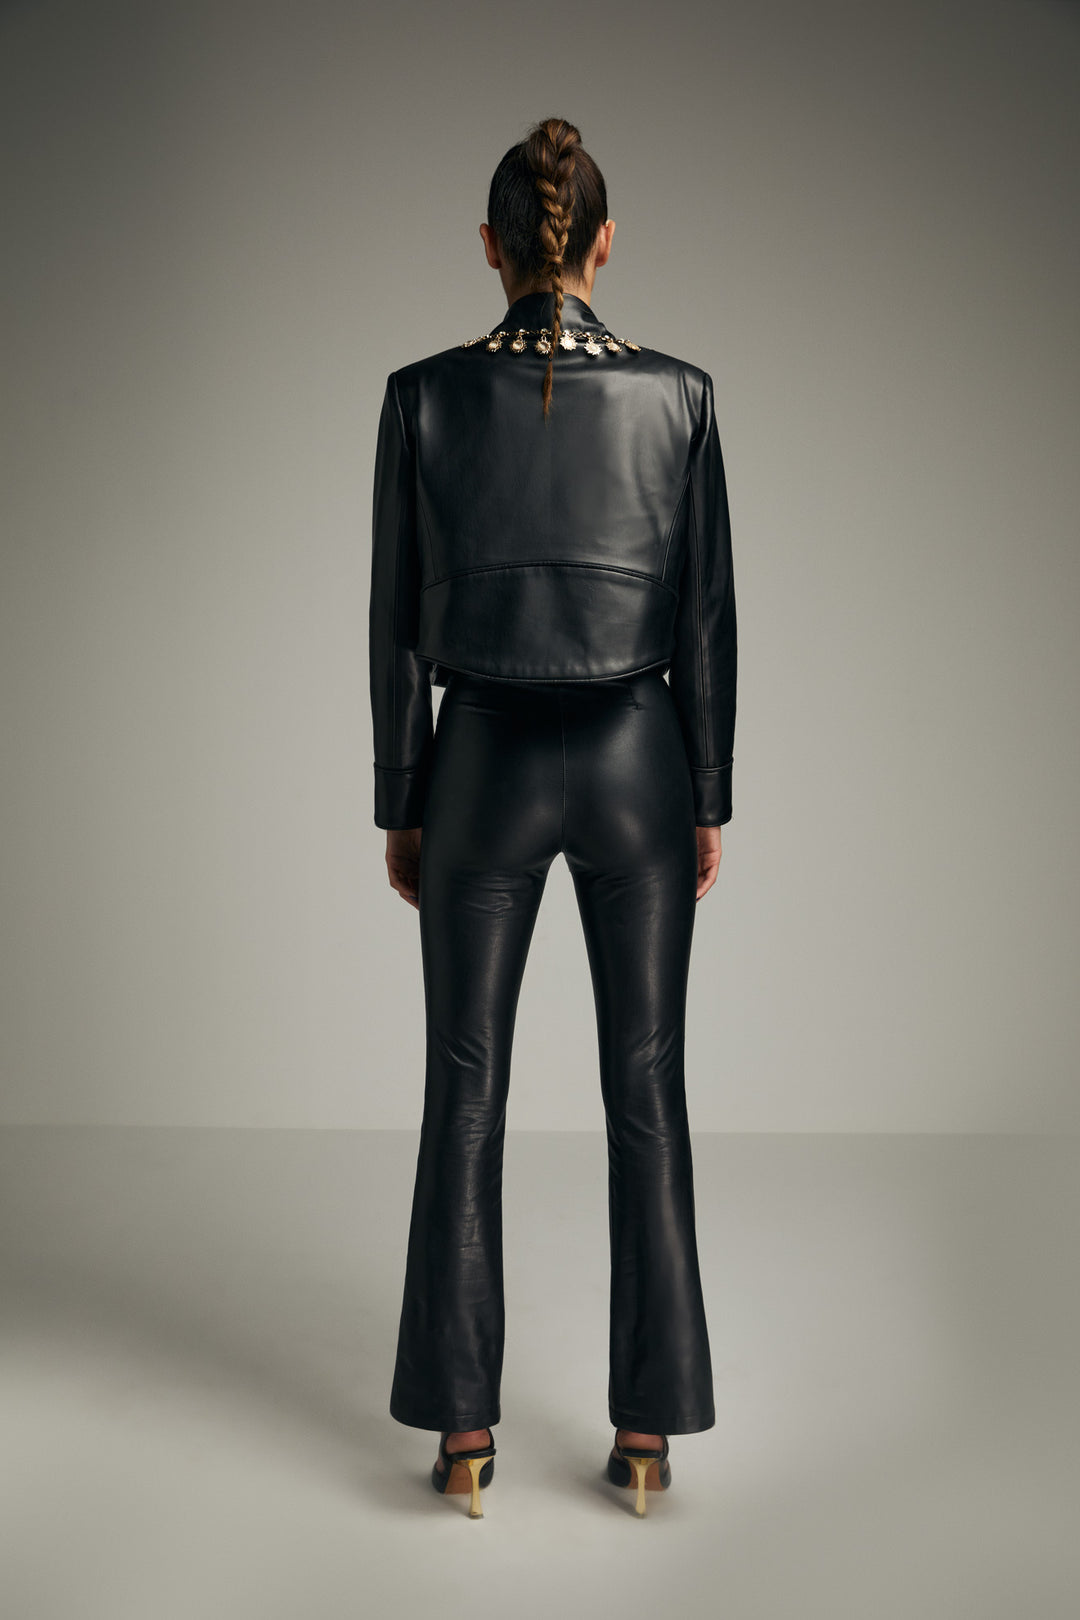 Flared FITTED Black Vegan Leather Pants